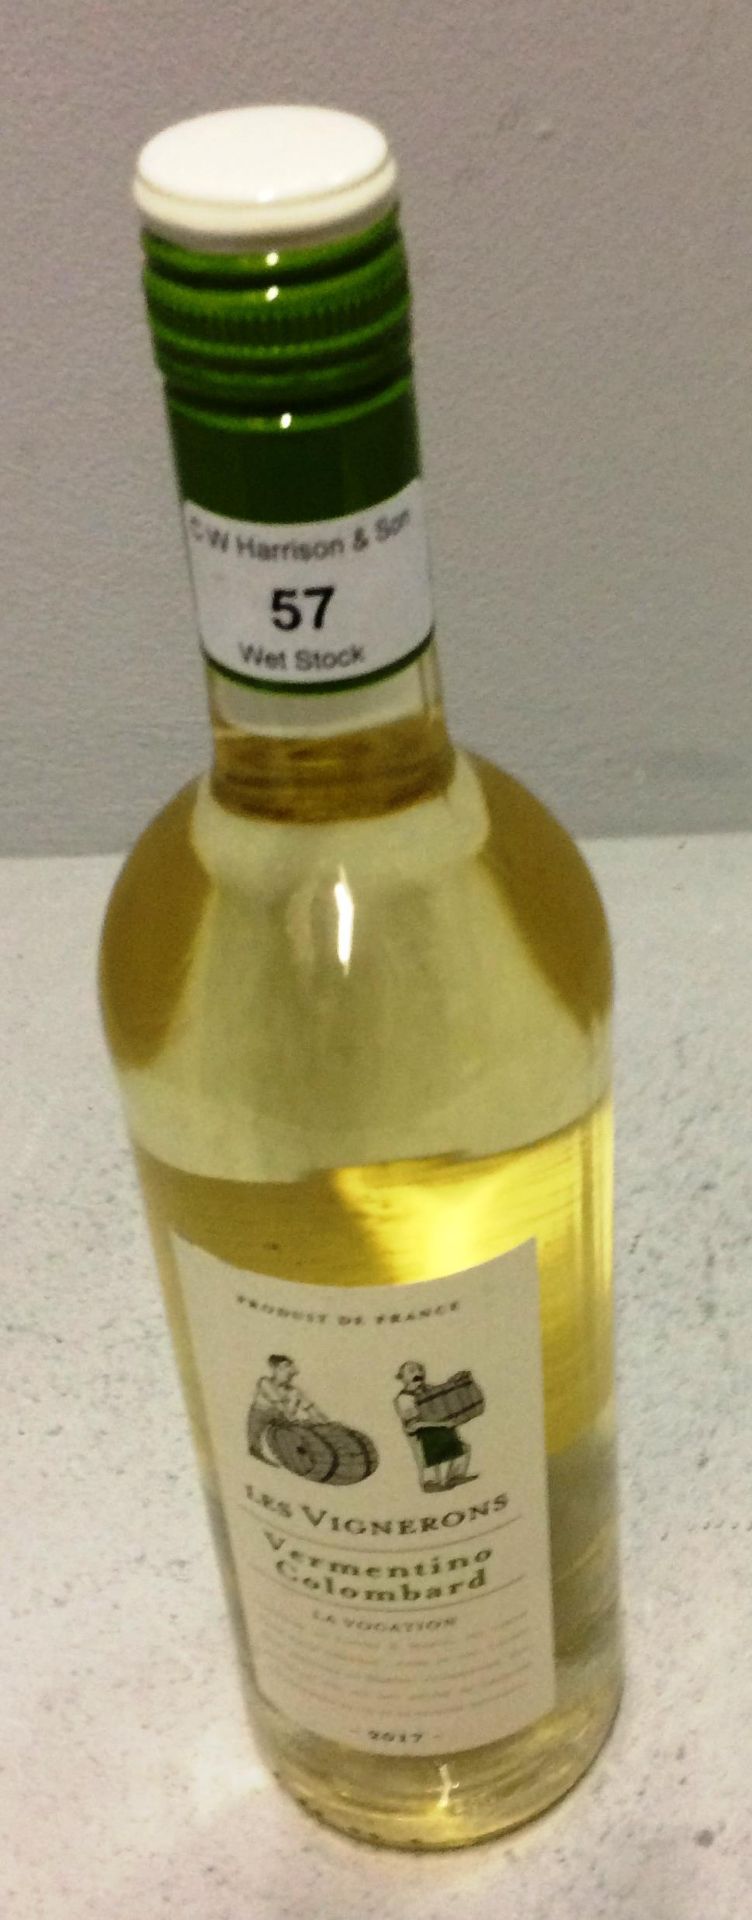 7 x 75cl bottles of Les Vermentino Colombard 2017 white wine